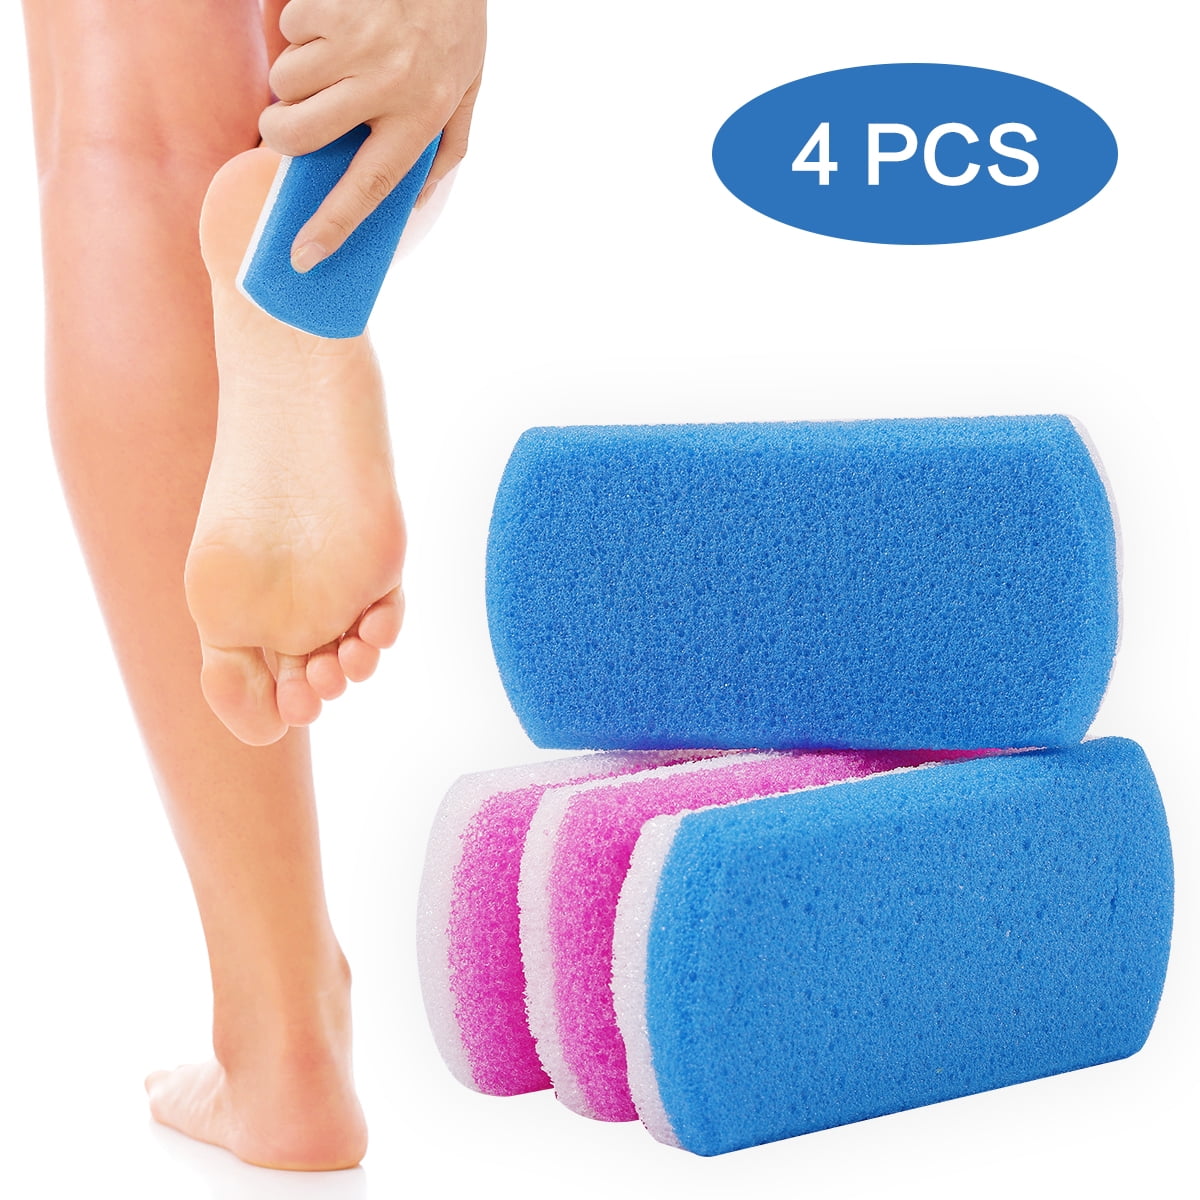 Foot Pumice Foot, Square Pink Hard Dead Skin Remover Scrubber